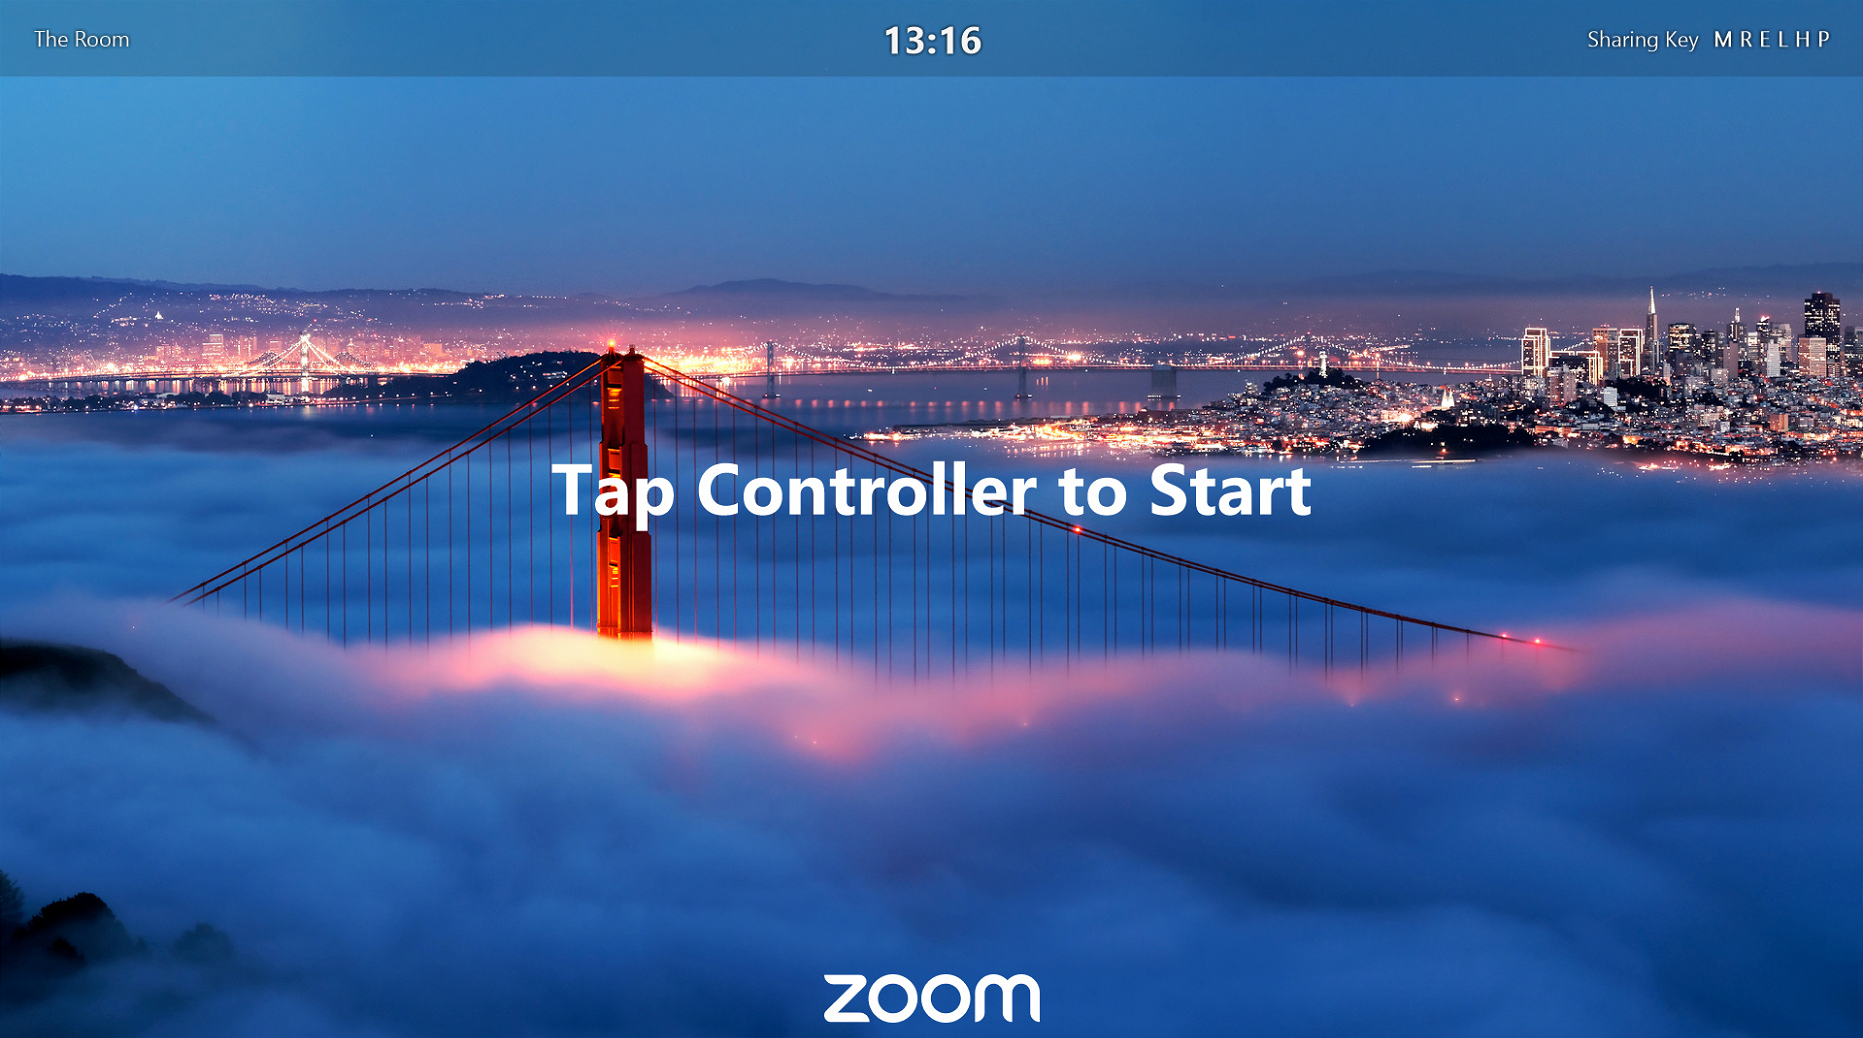 Image of a Zoom room background. Text includes the room name, Sharing Key, and the instruction to "Tap Controller to Start"